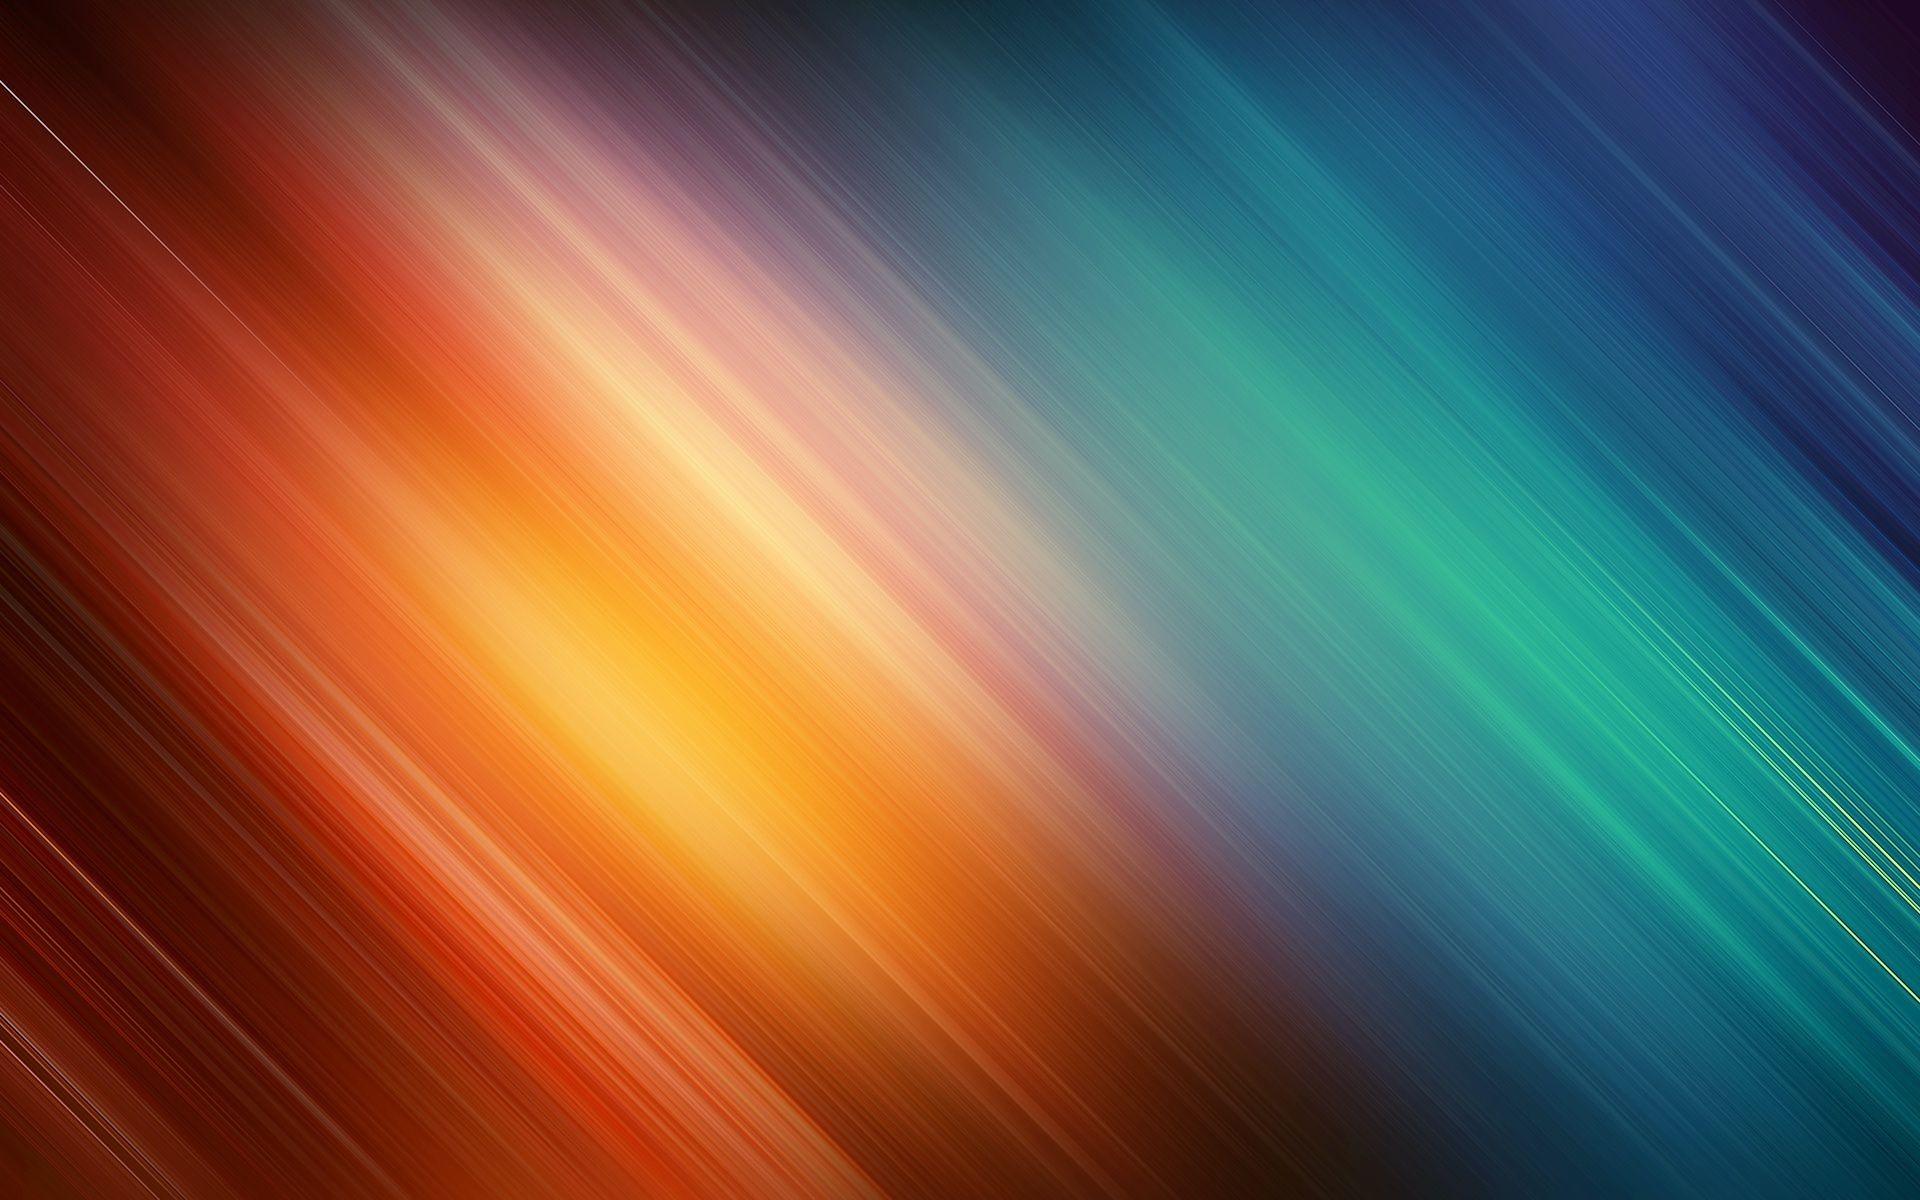 HD wallpaper Without Warning Artistic Abstract Blue Orange Lines  backgrounds  Wallpaper Flare